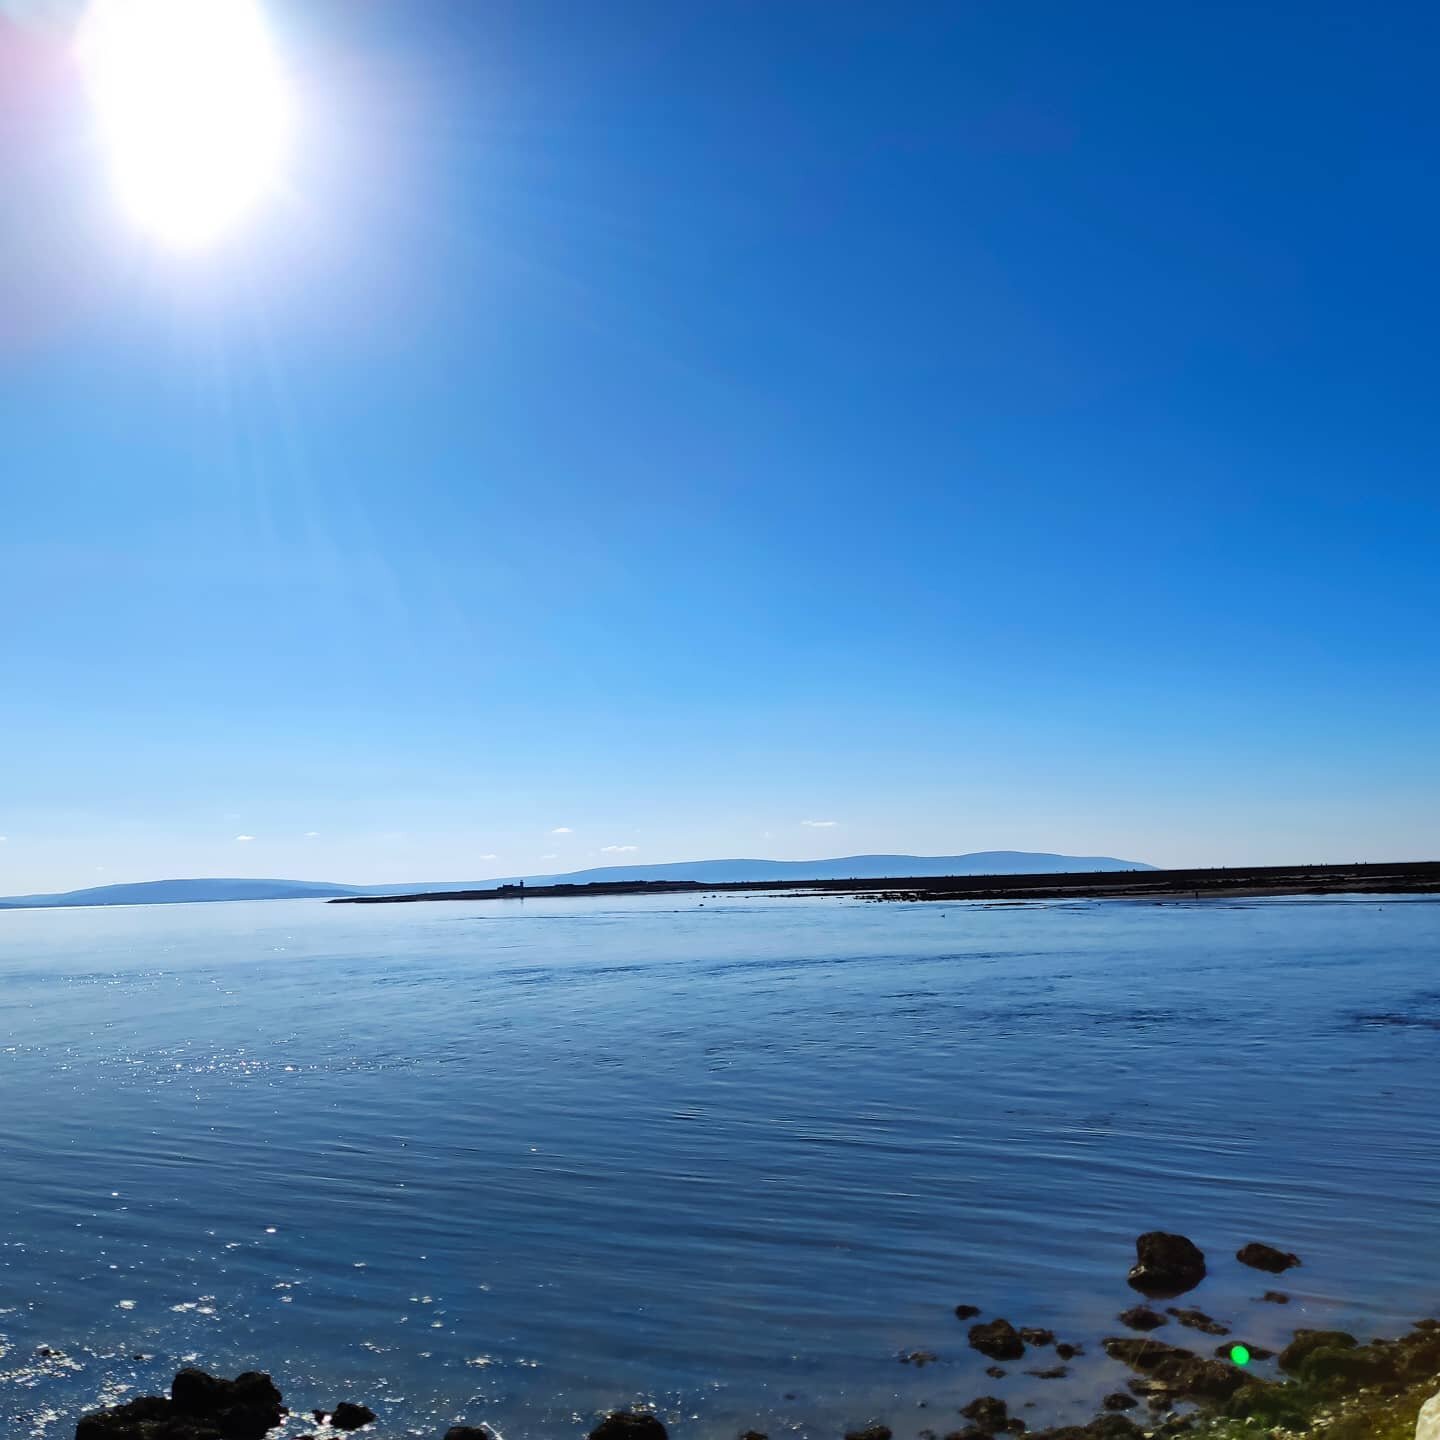 Nothing like Galway bay on a sunny day.